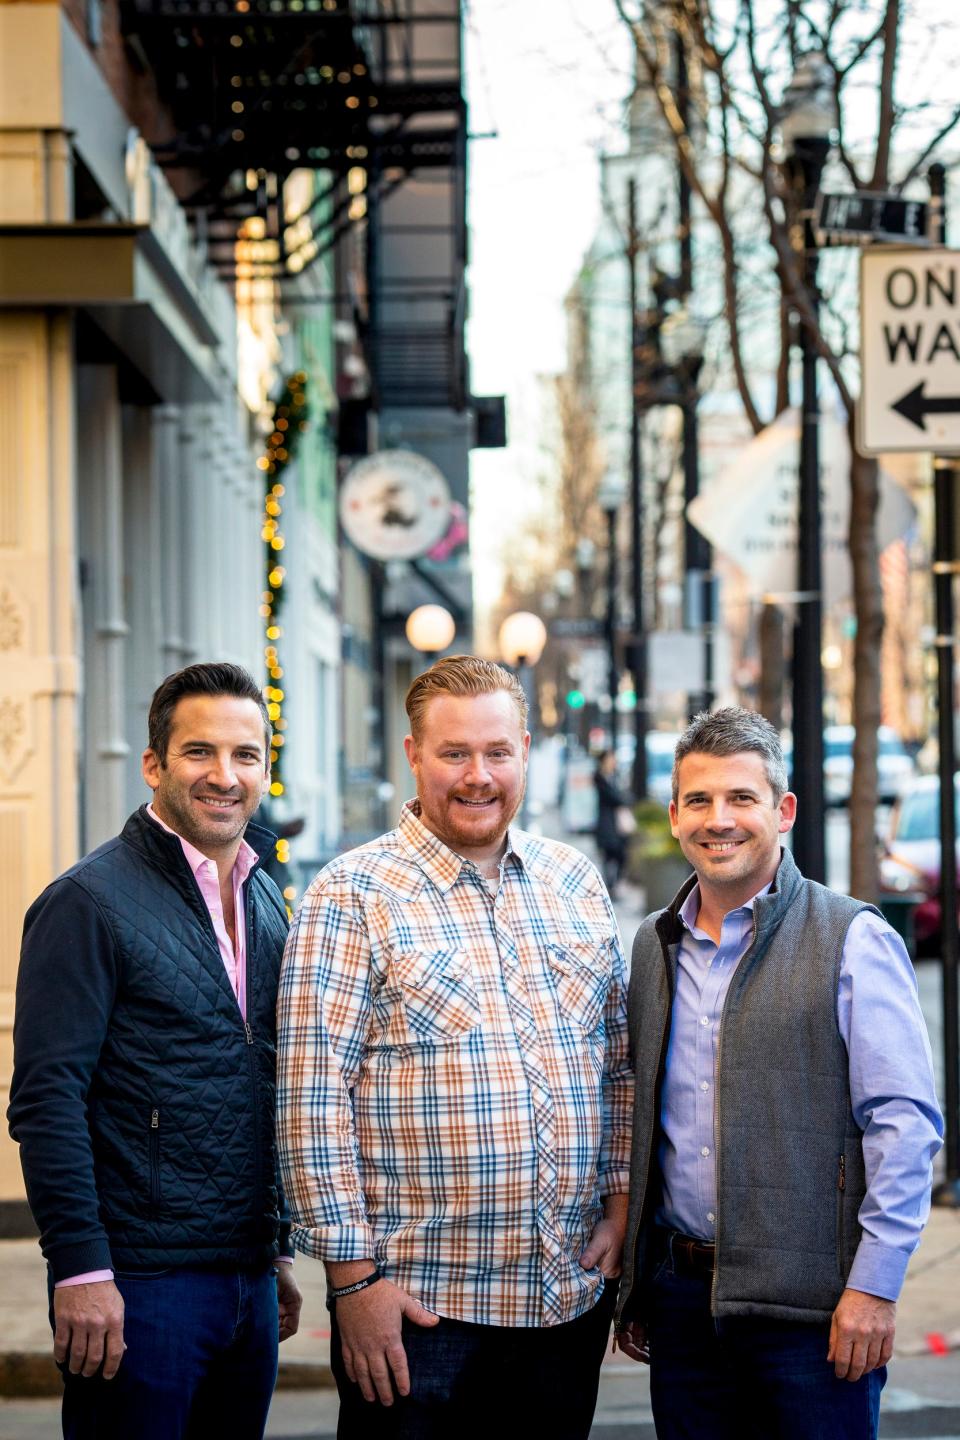 Thunderdome Restaurant Group co-founders and owners John Lanni, Alex Blust and Joe Lanni in December 2019.